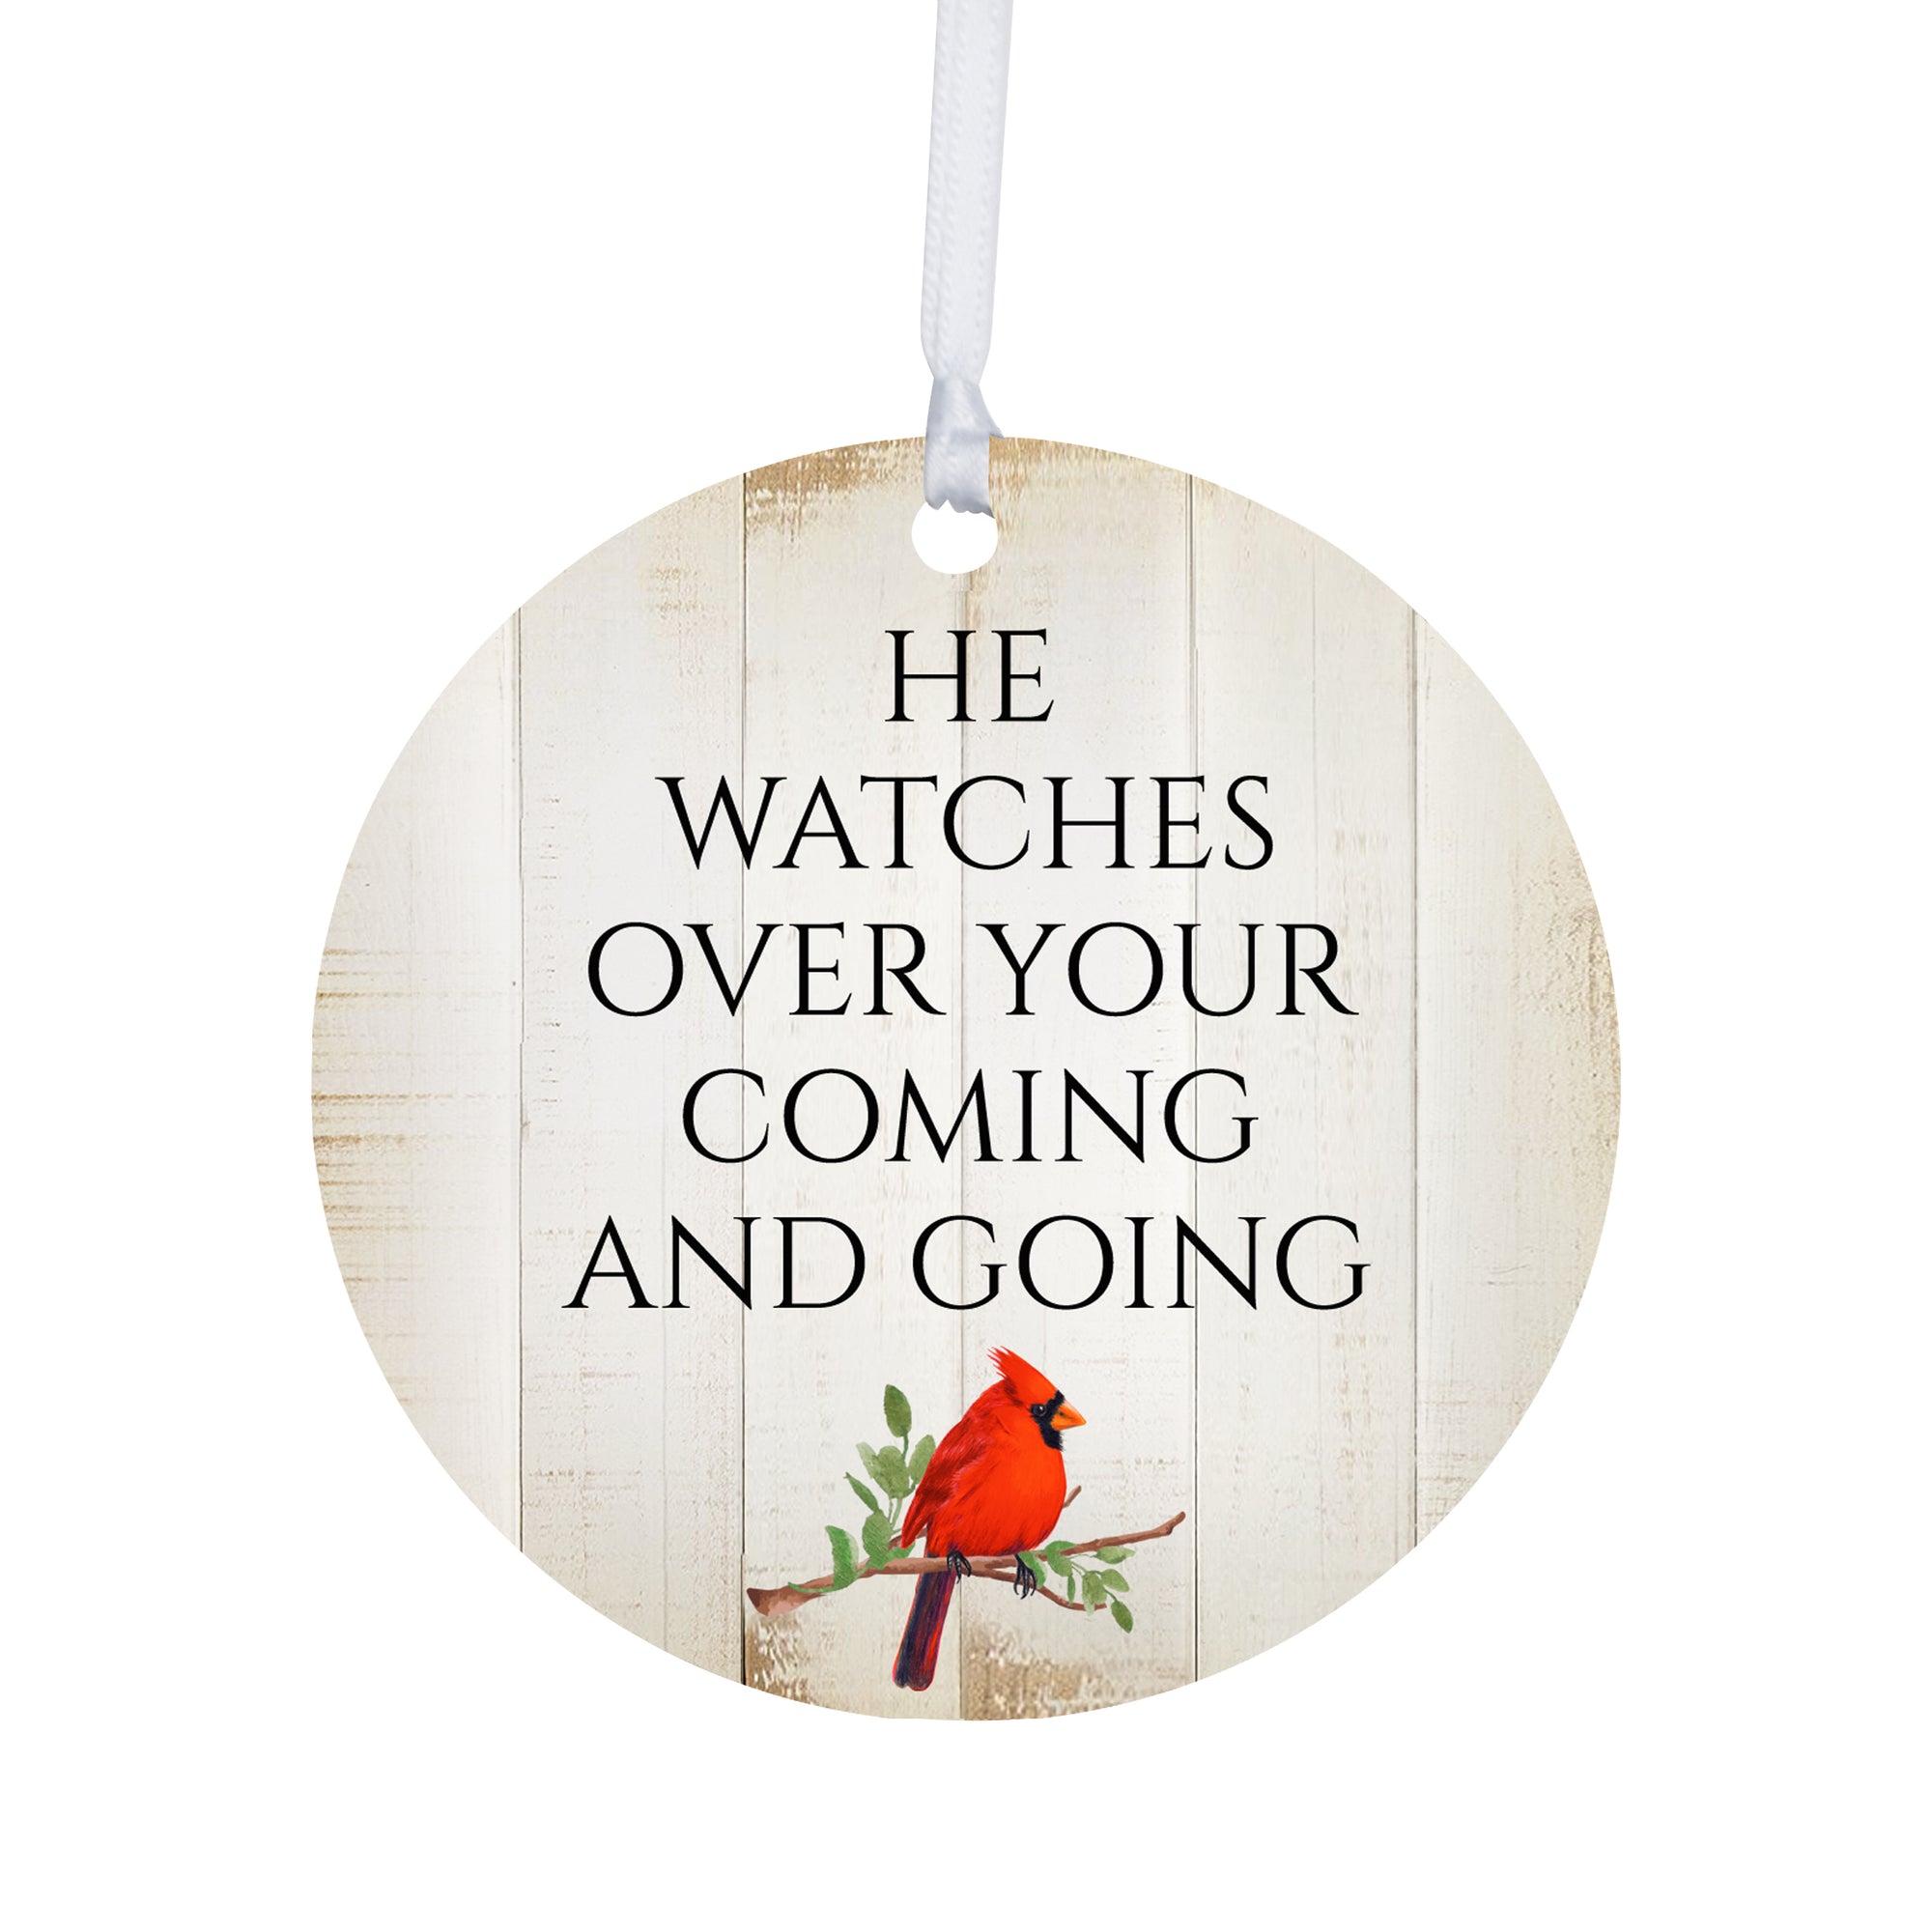 Vintage-Inspired Cardinal Ornament With Everyday Verses Gift Ideas - He Watches